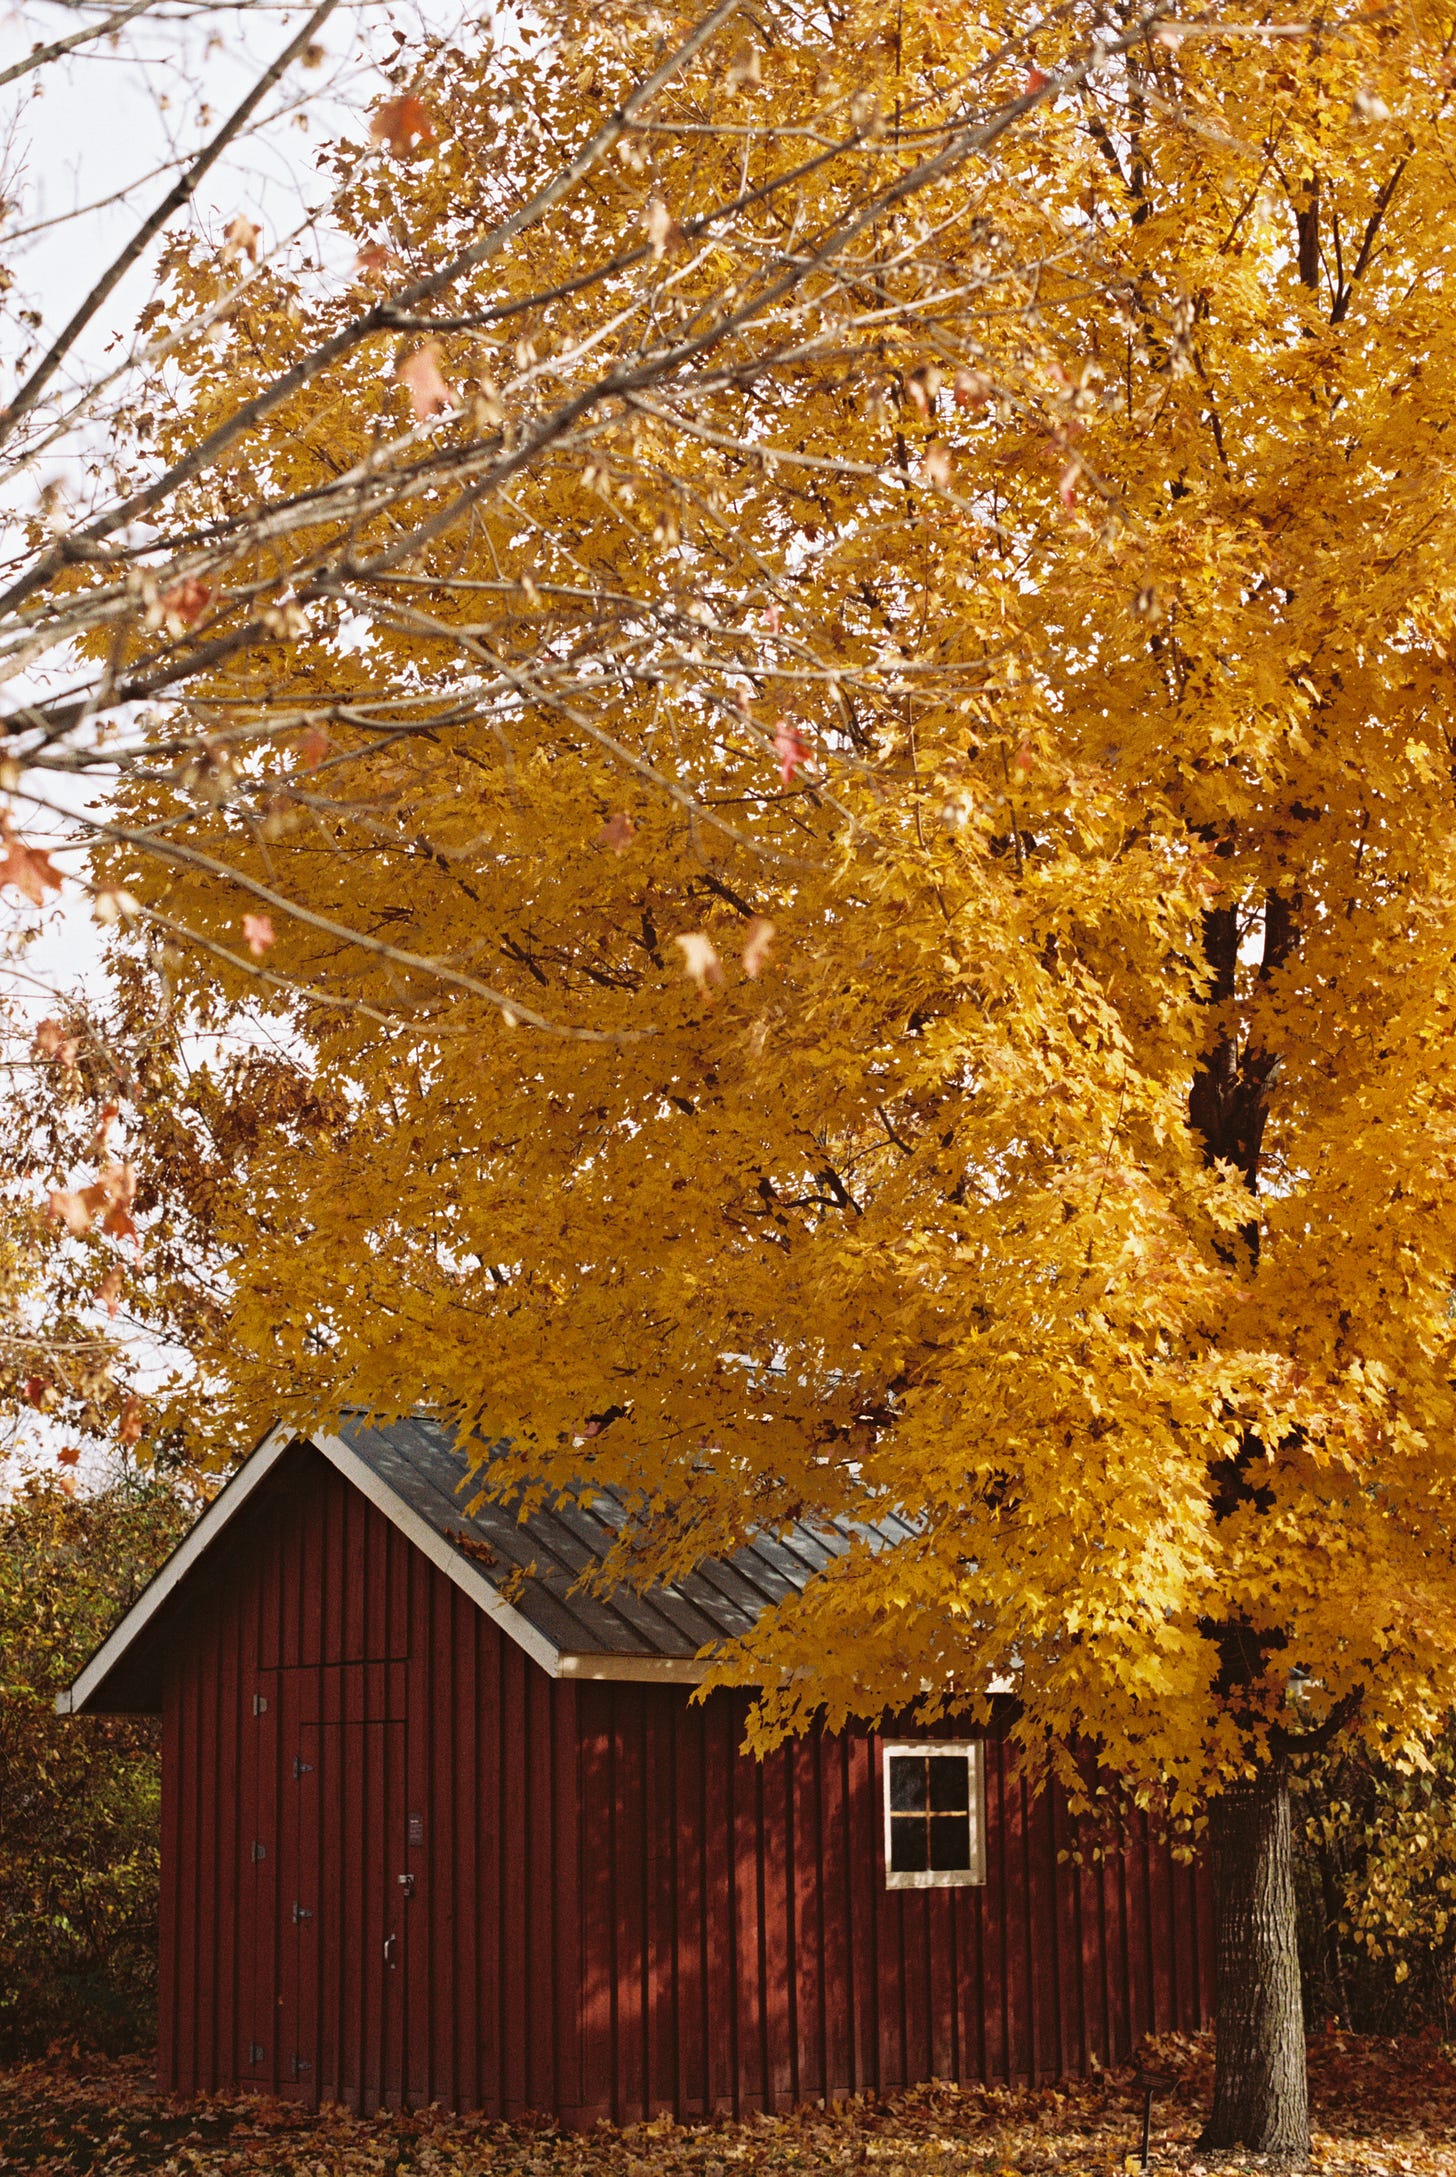 A red, barn-like shed is partly hidden by a large tree with golden leaves.